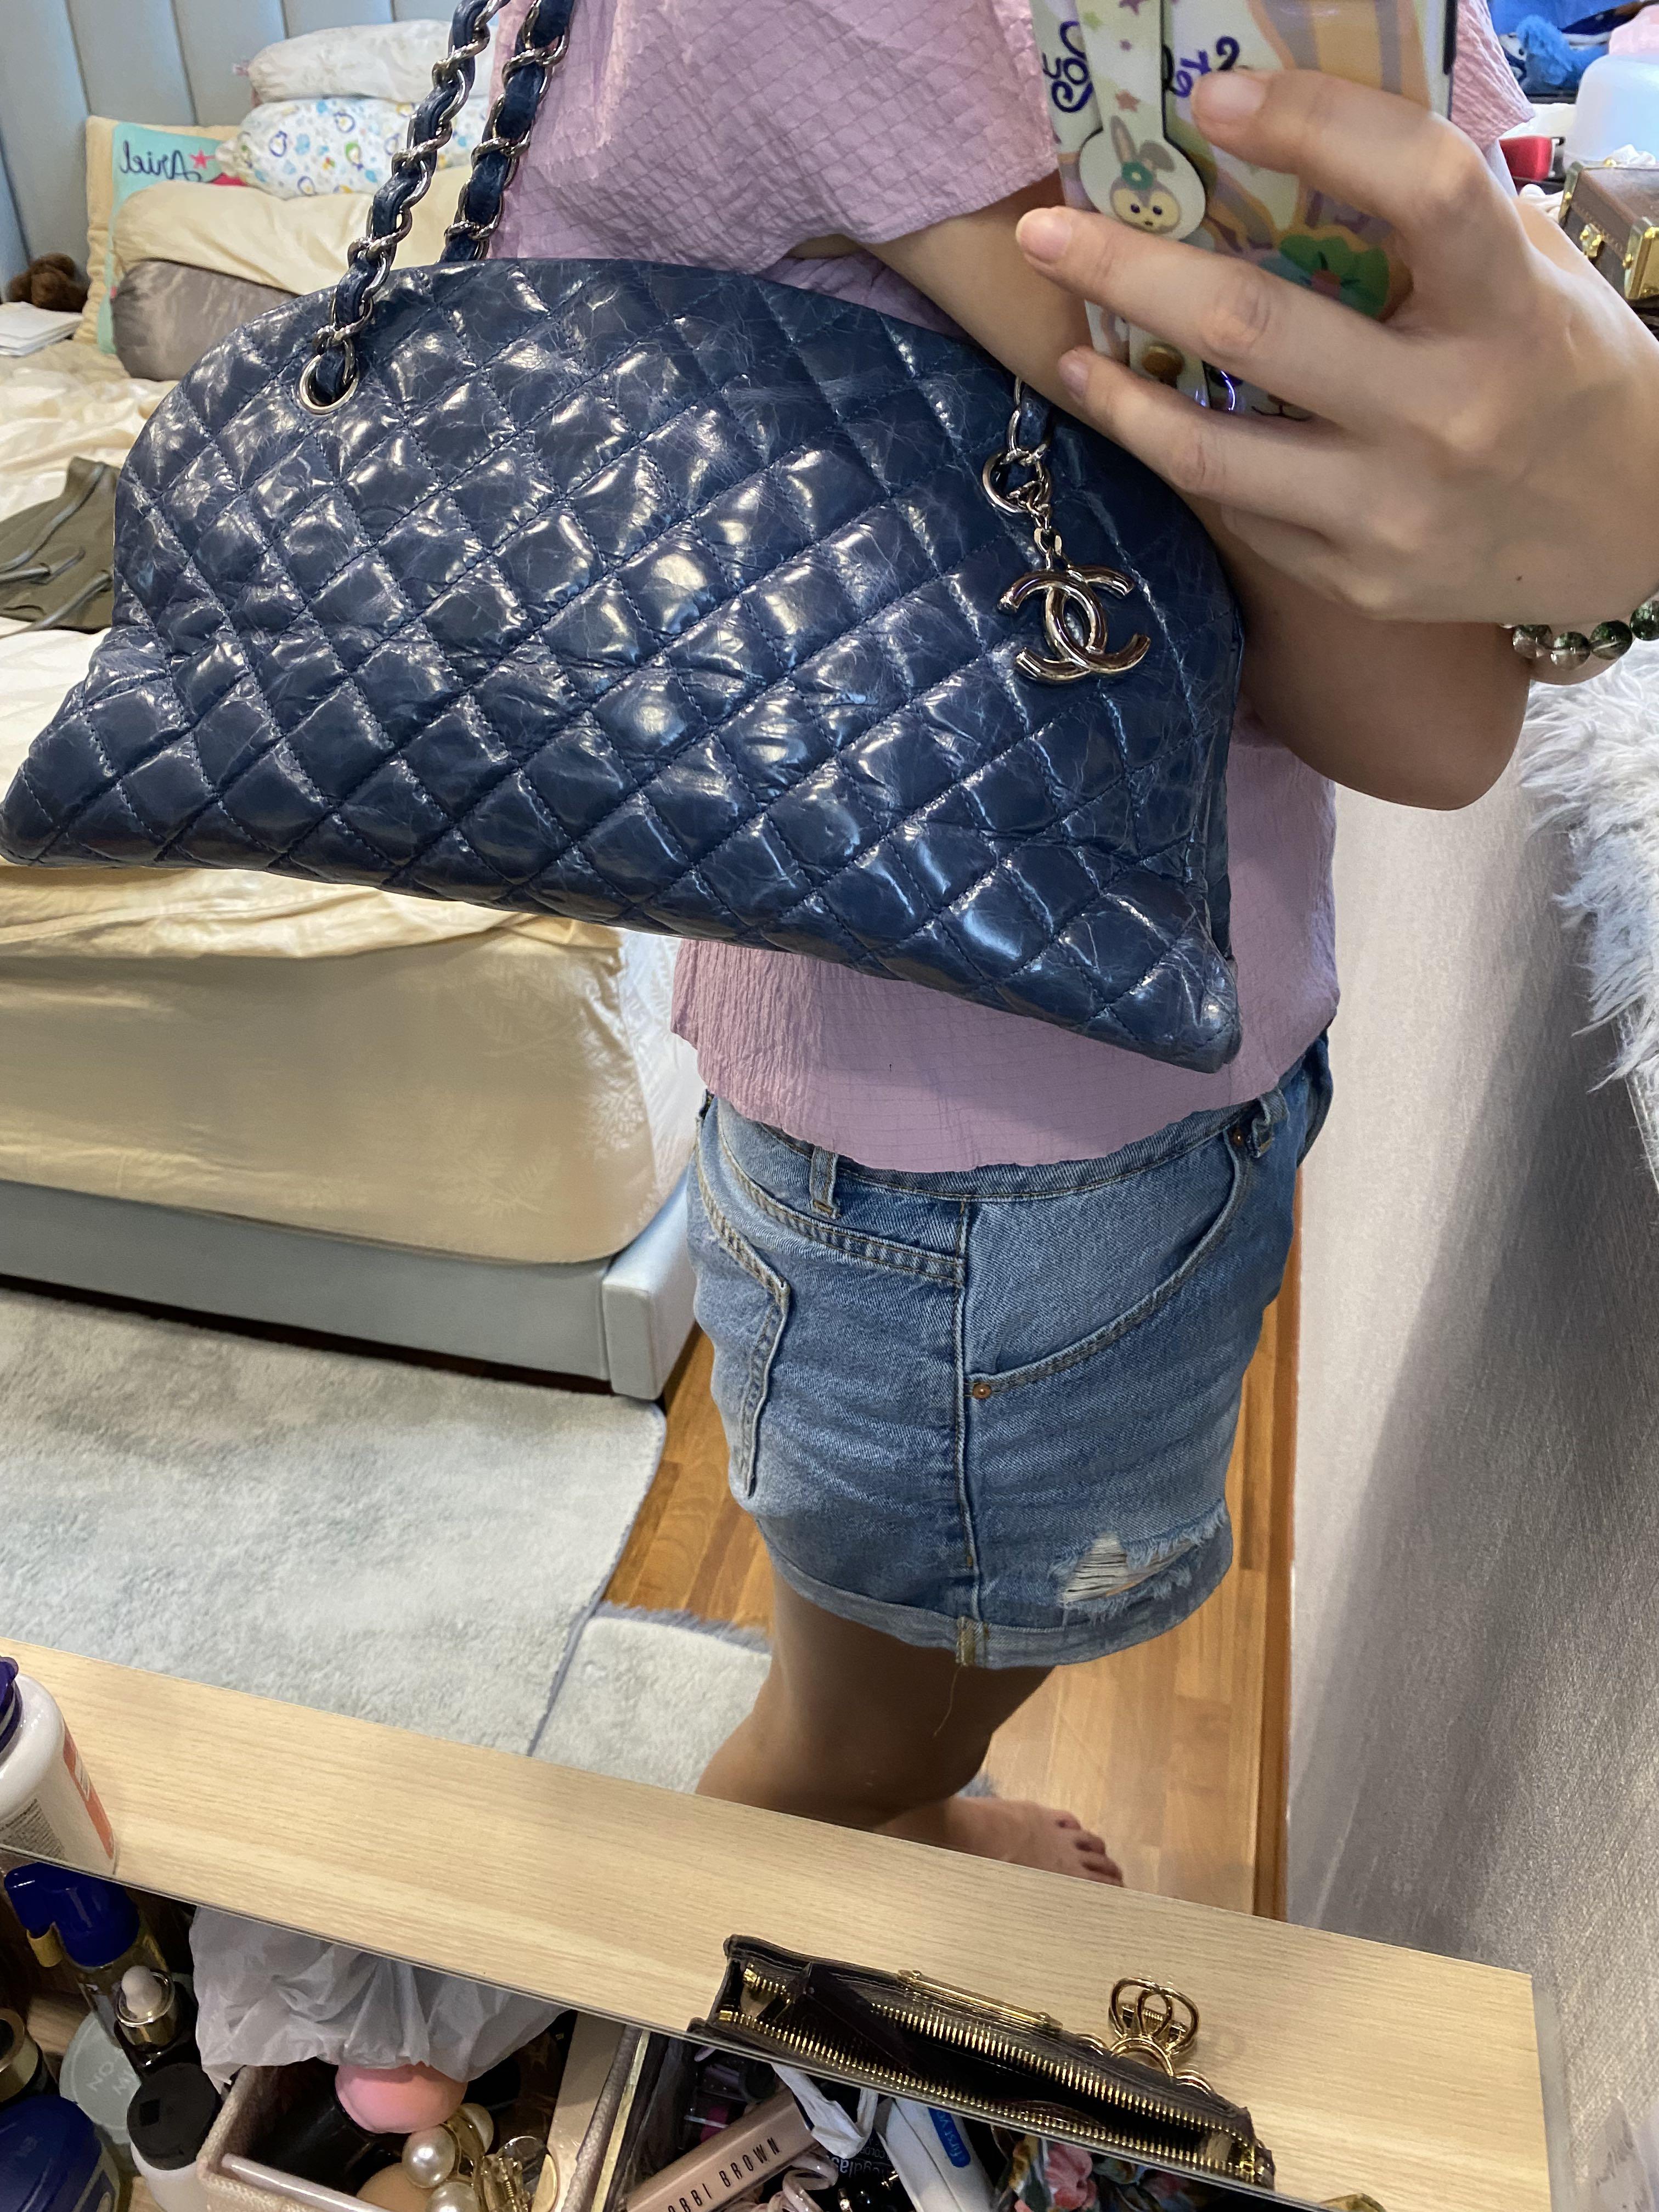 Chanel Mademoiselle Bag in Blue